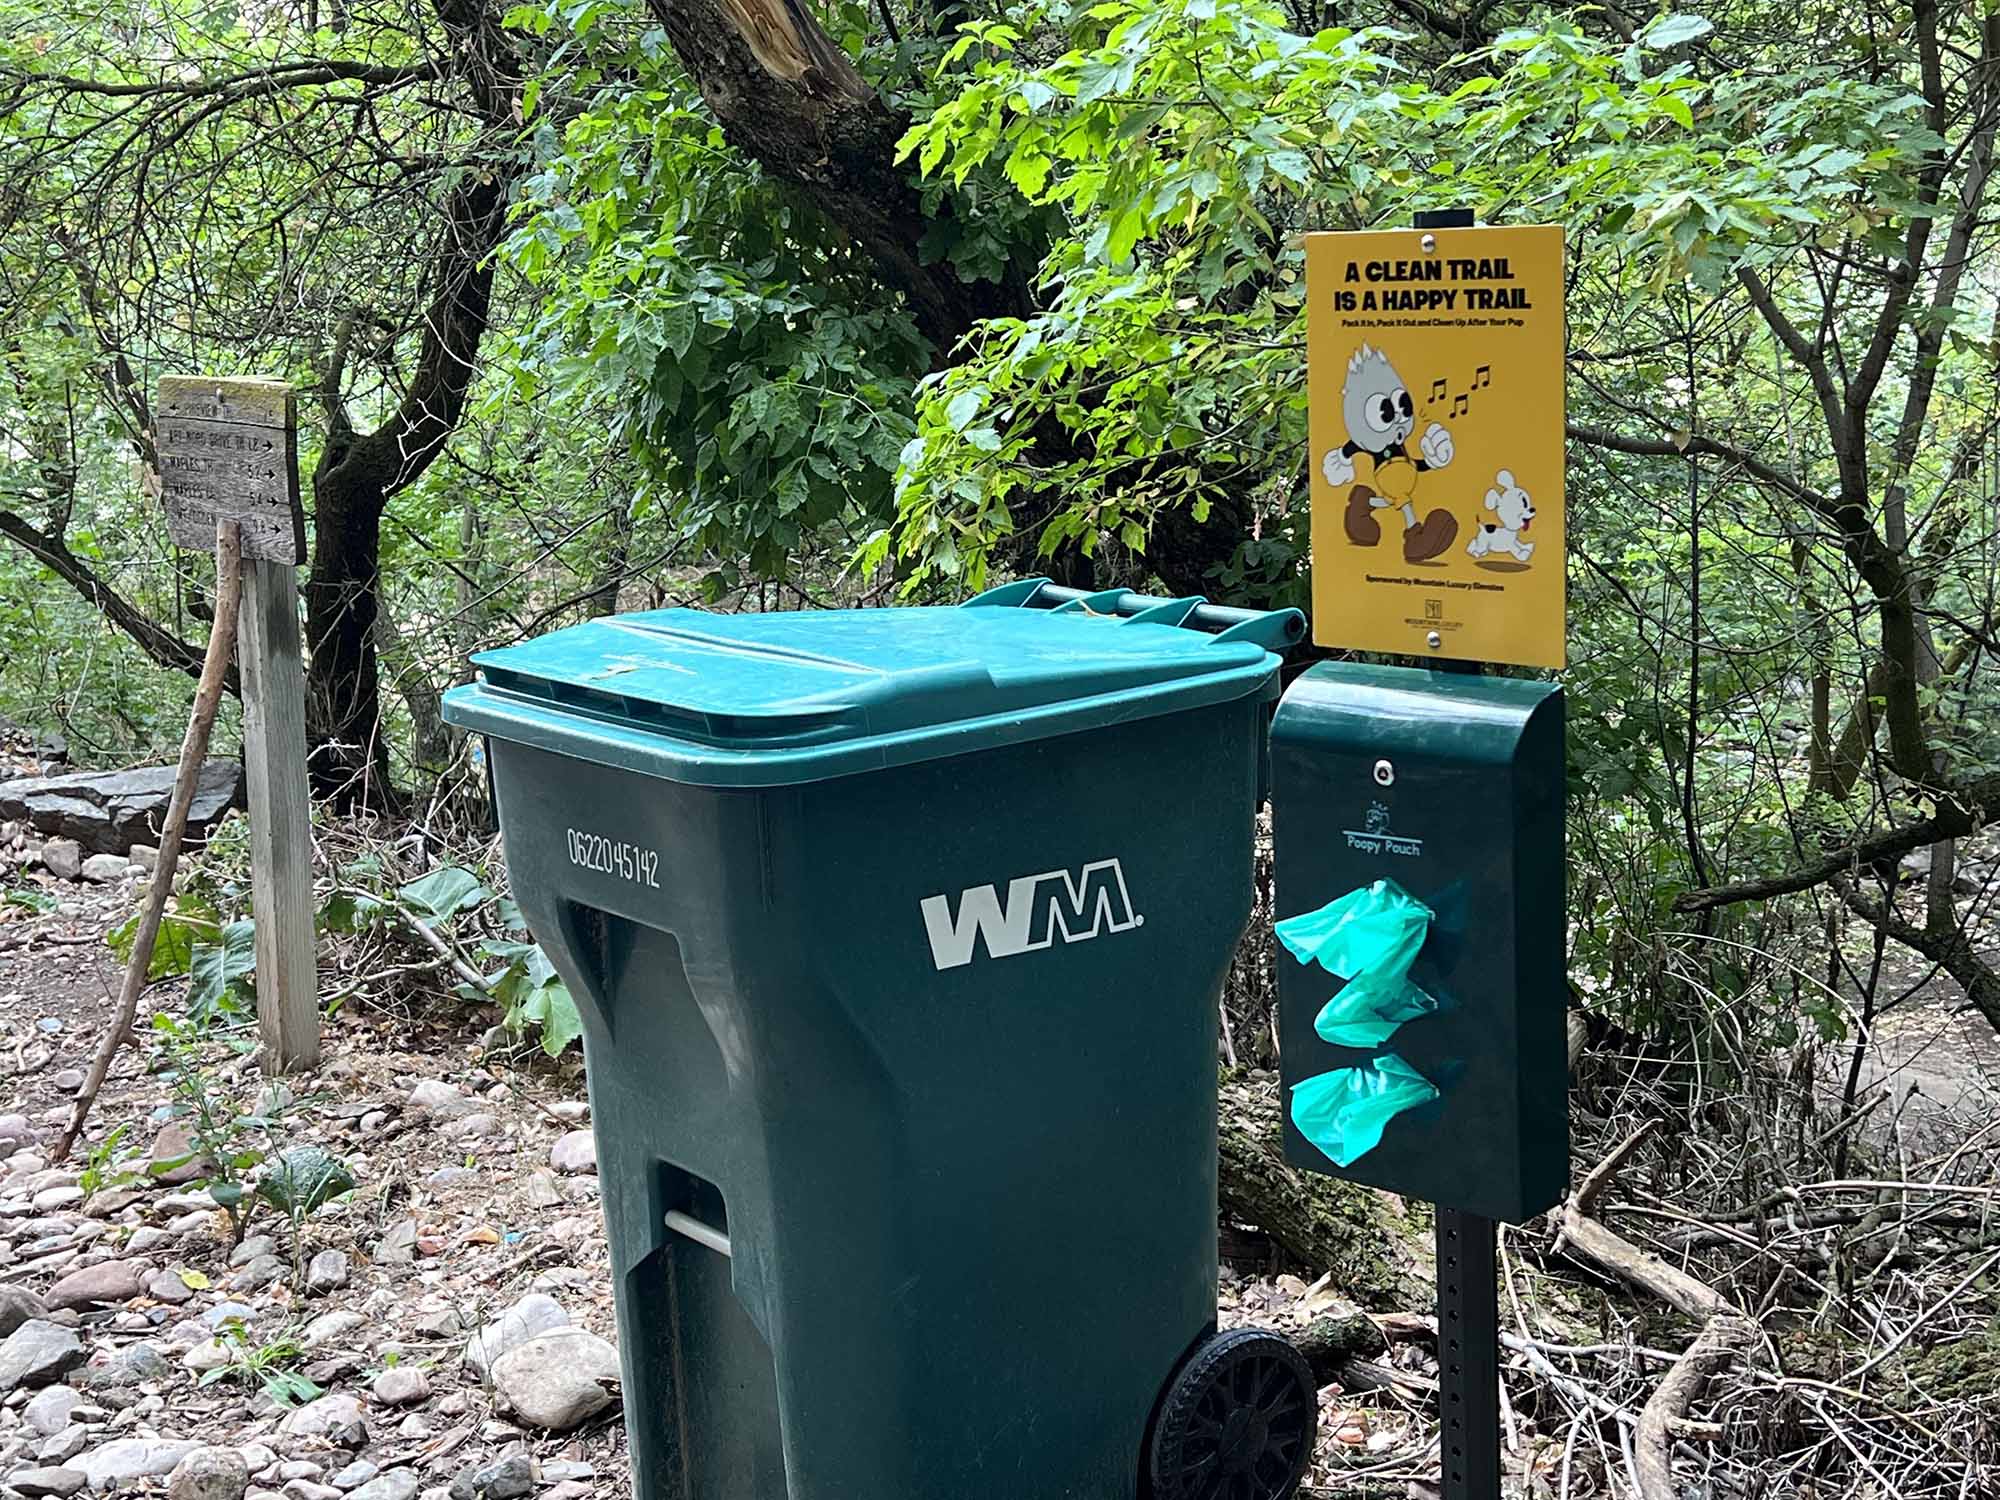 The trash can and sign at Wheelers Creek Trailhead.